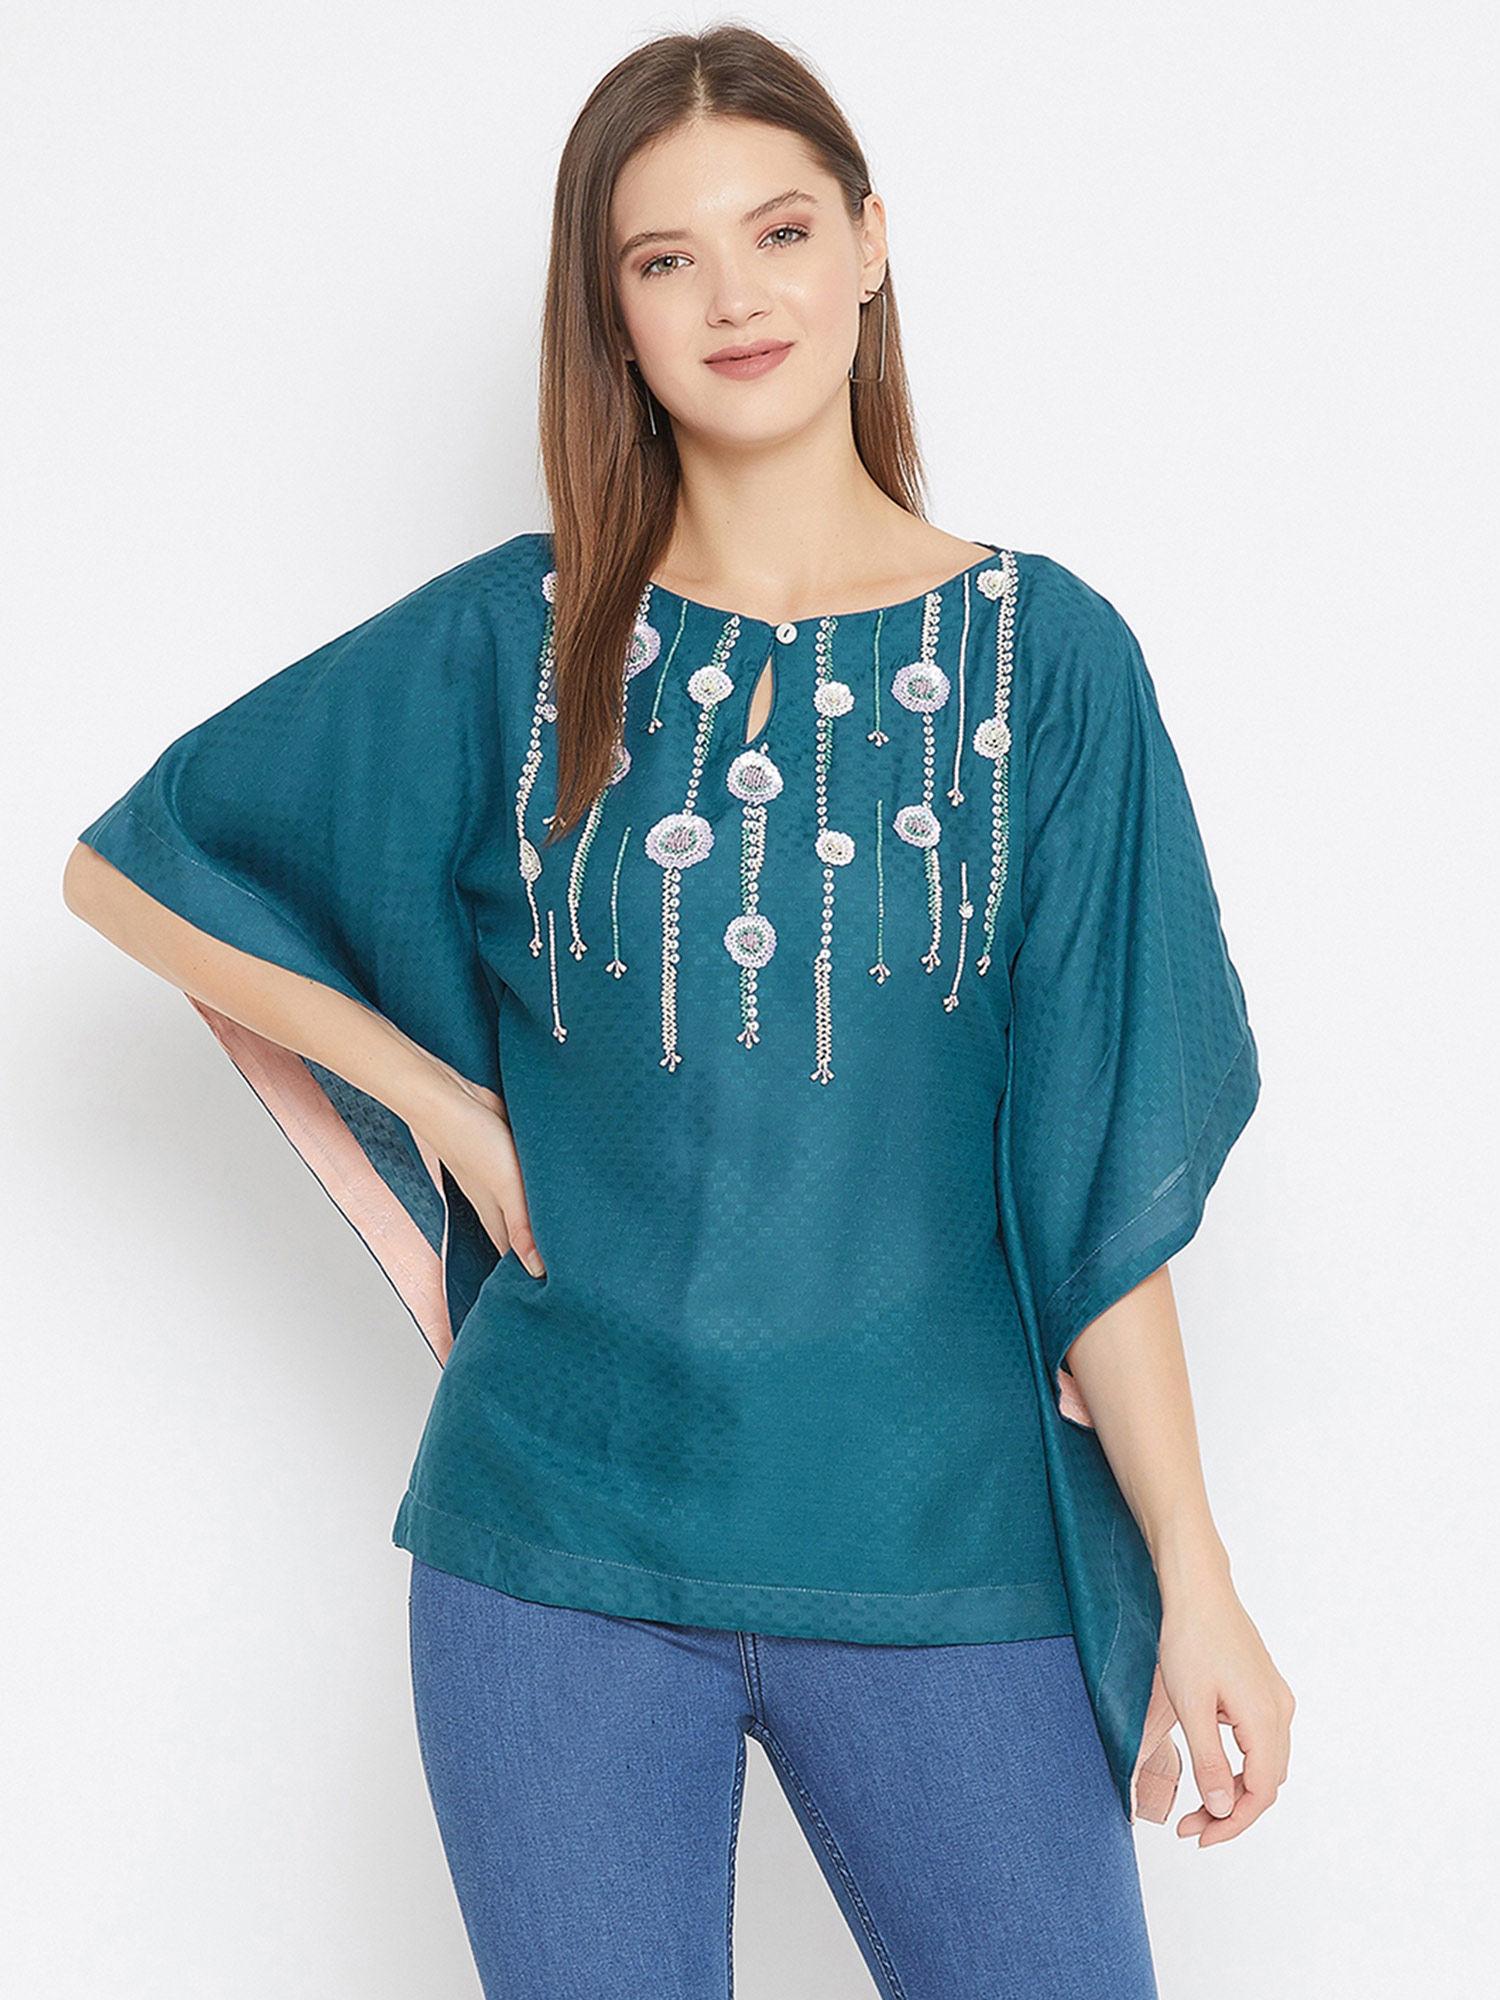 teal blue kaftan top with sequin hand embroidery